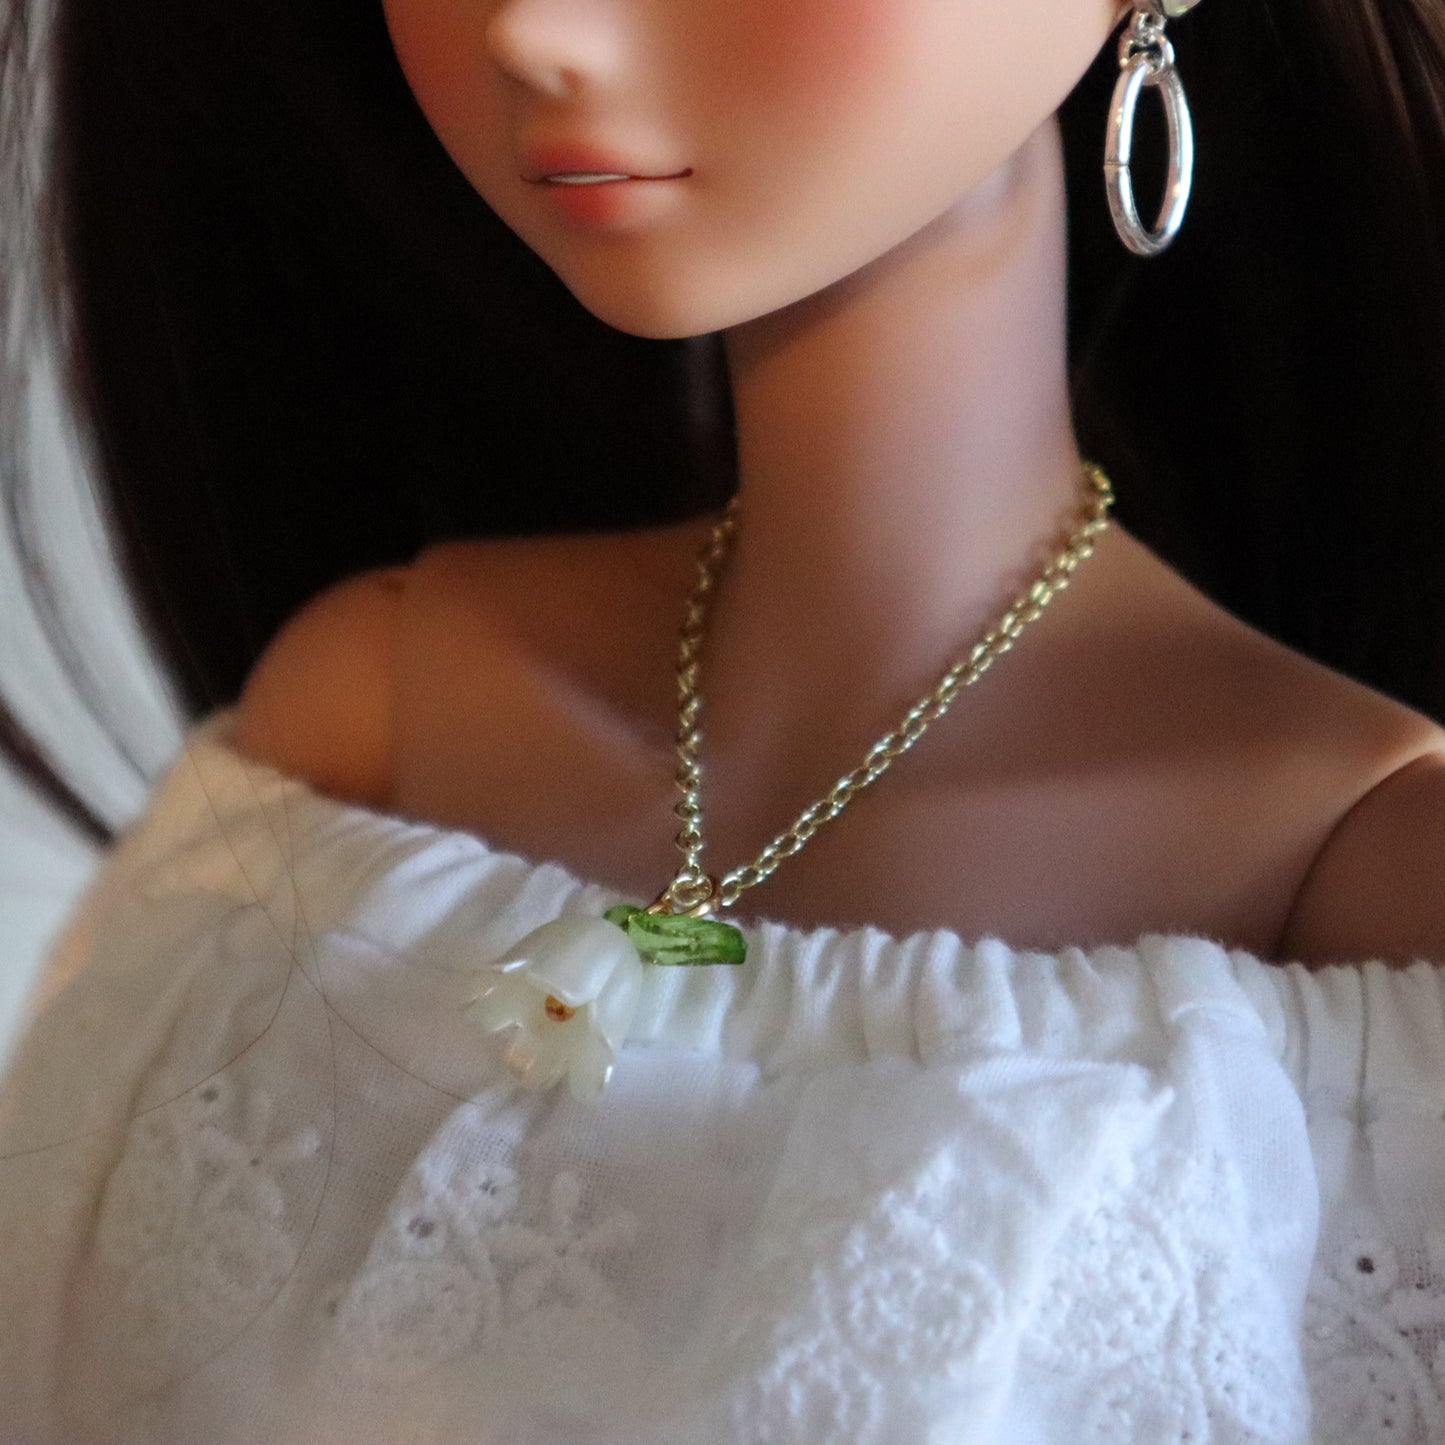 Magnetic Clasp Necklace for BJD - Snowdrop Pendant